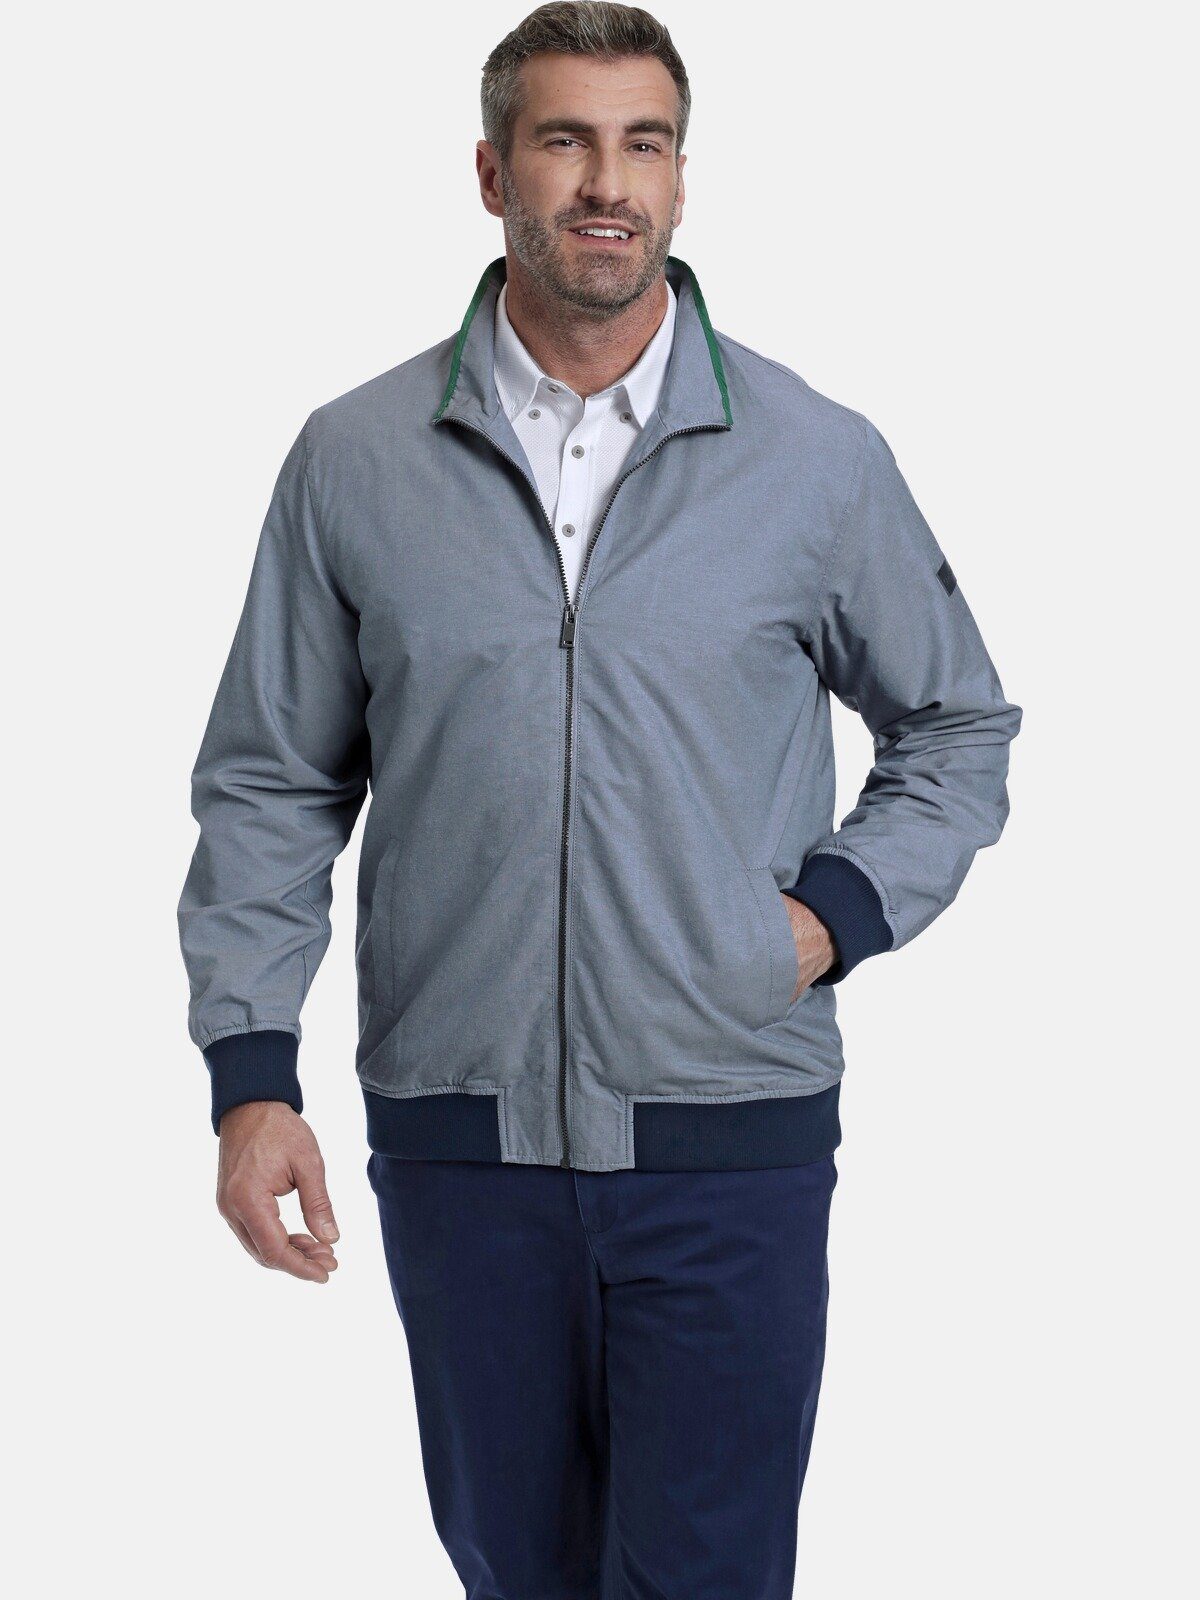 Charles Colby Blouson SIR CICHTA Comfort Fit, Baumwoll-Mix